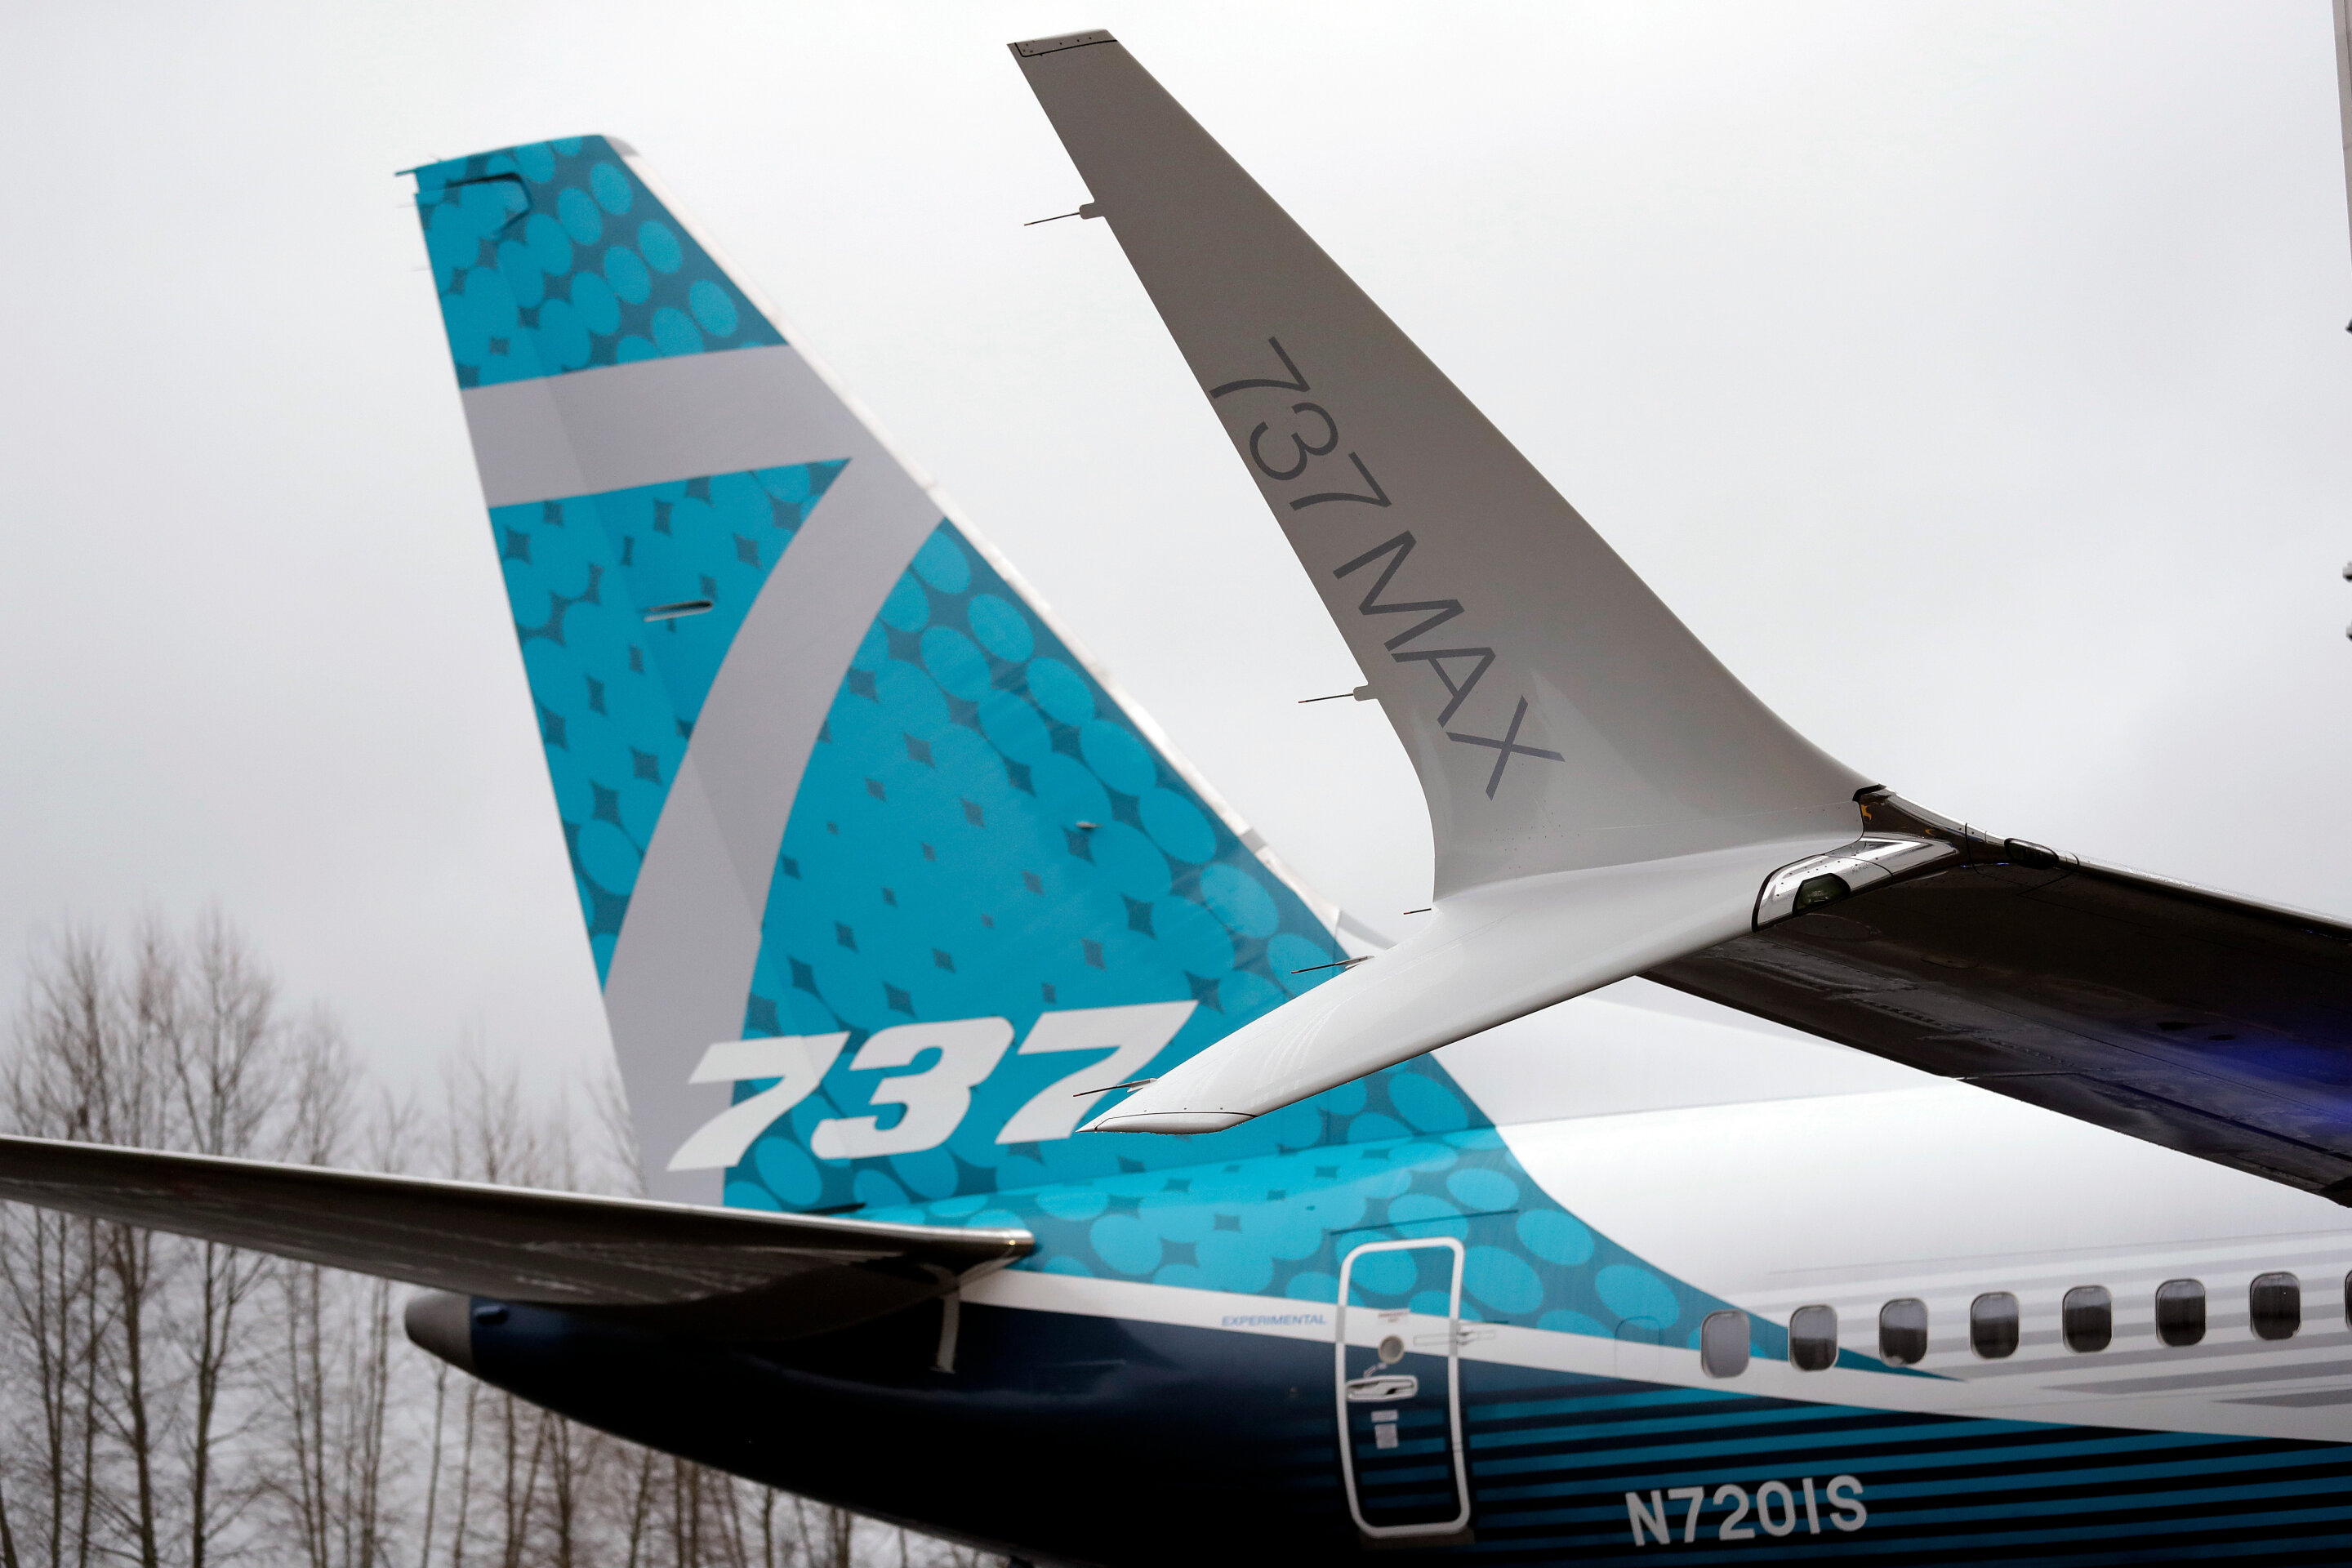 #Boeing asks airlines to inspect 737 Max jets for potential loose bolt